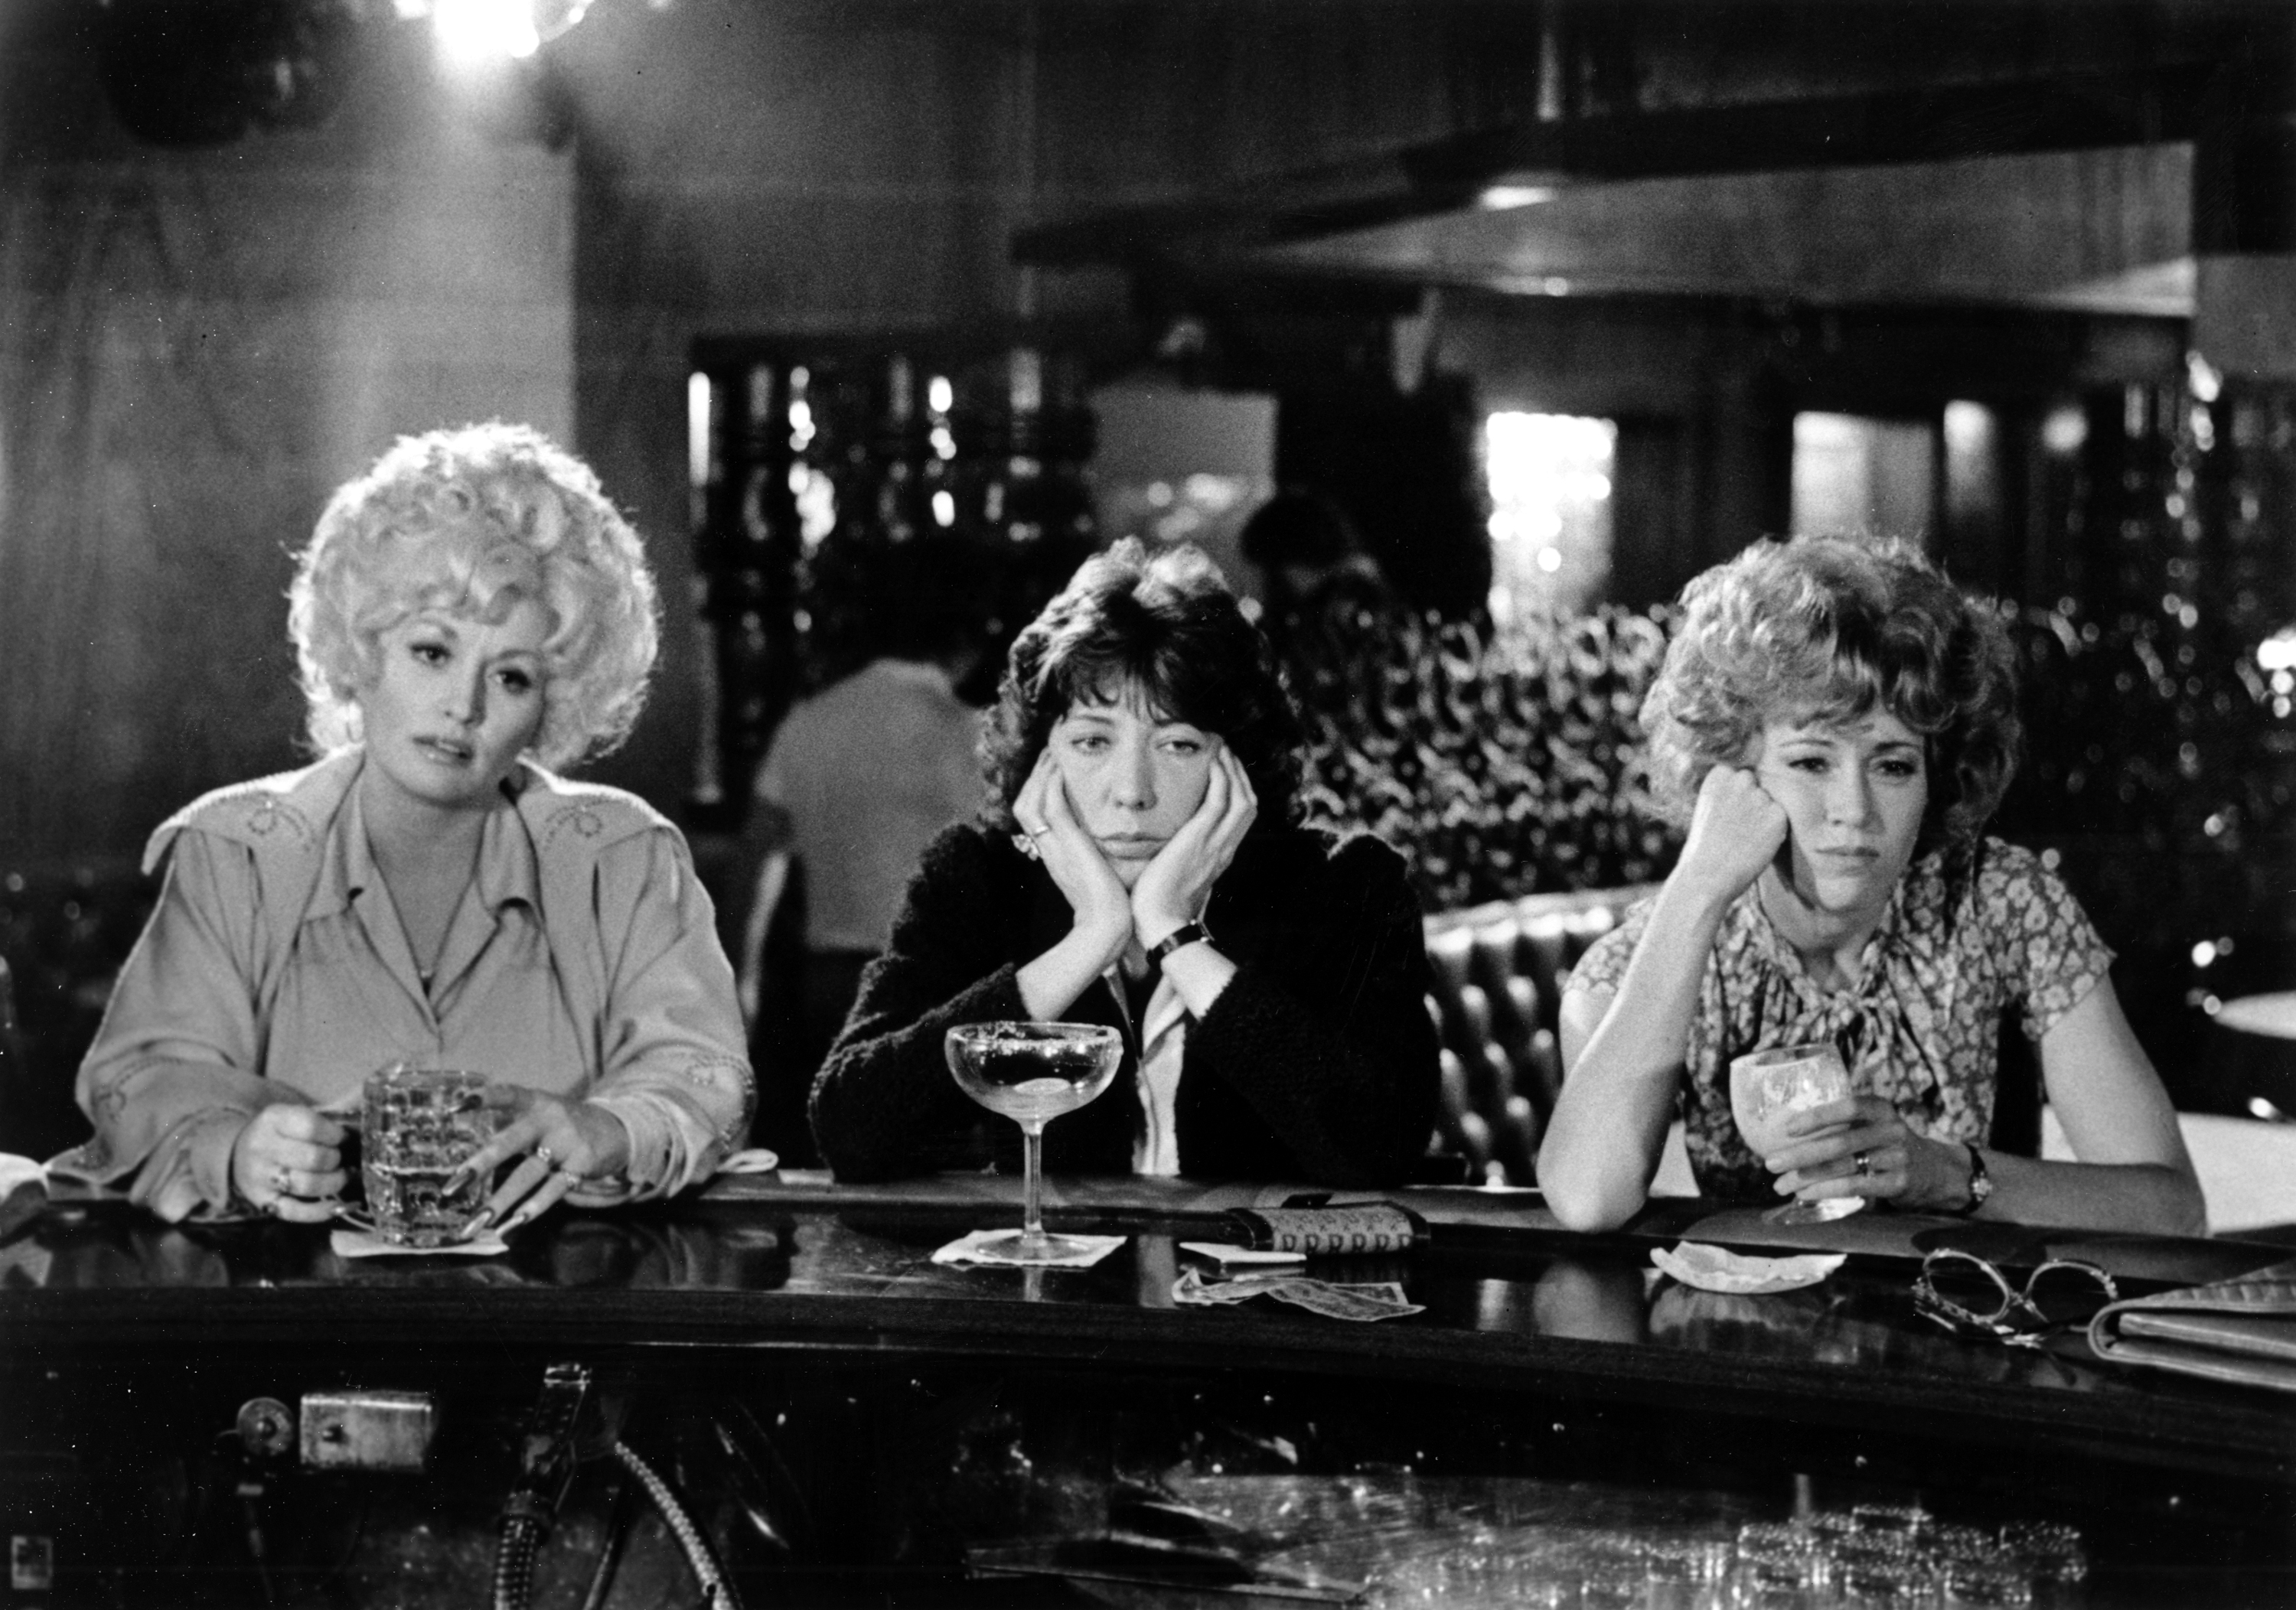 Dolly Parton, Lily Tomlin, and Jane Fonda sitting at a bar in the movie '9 to 5.'